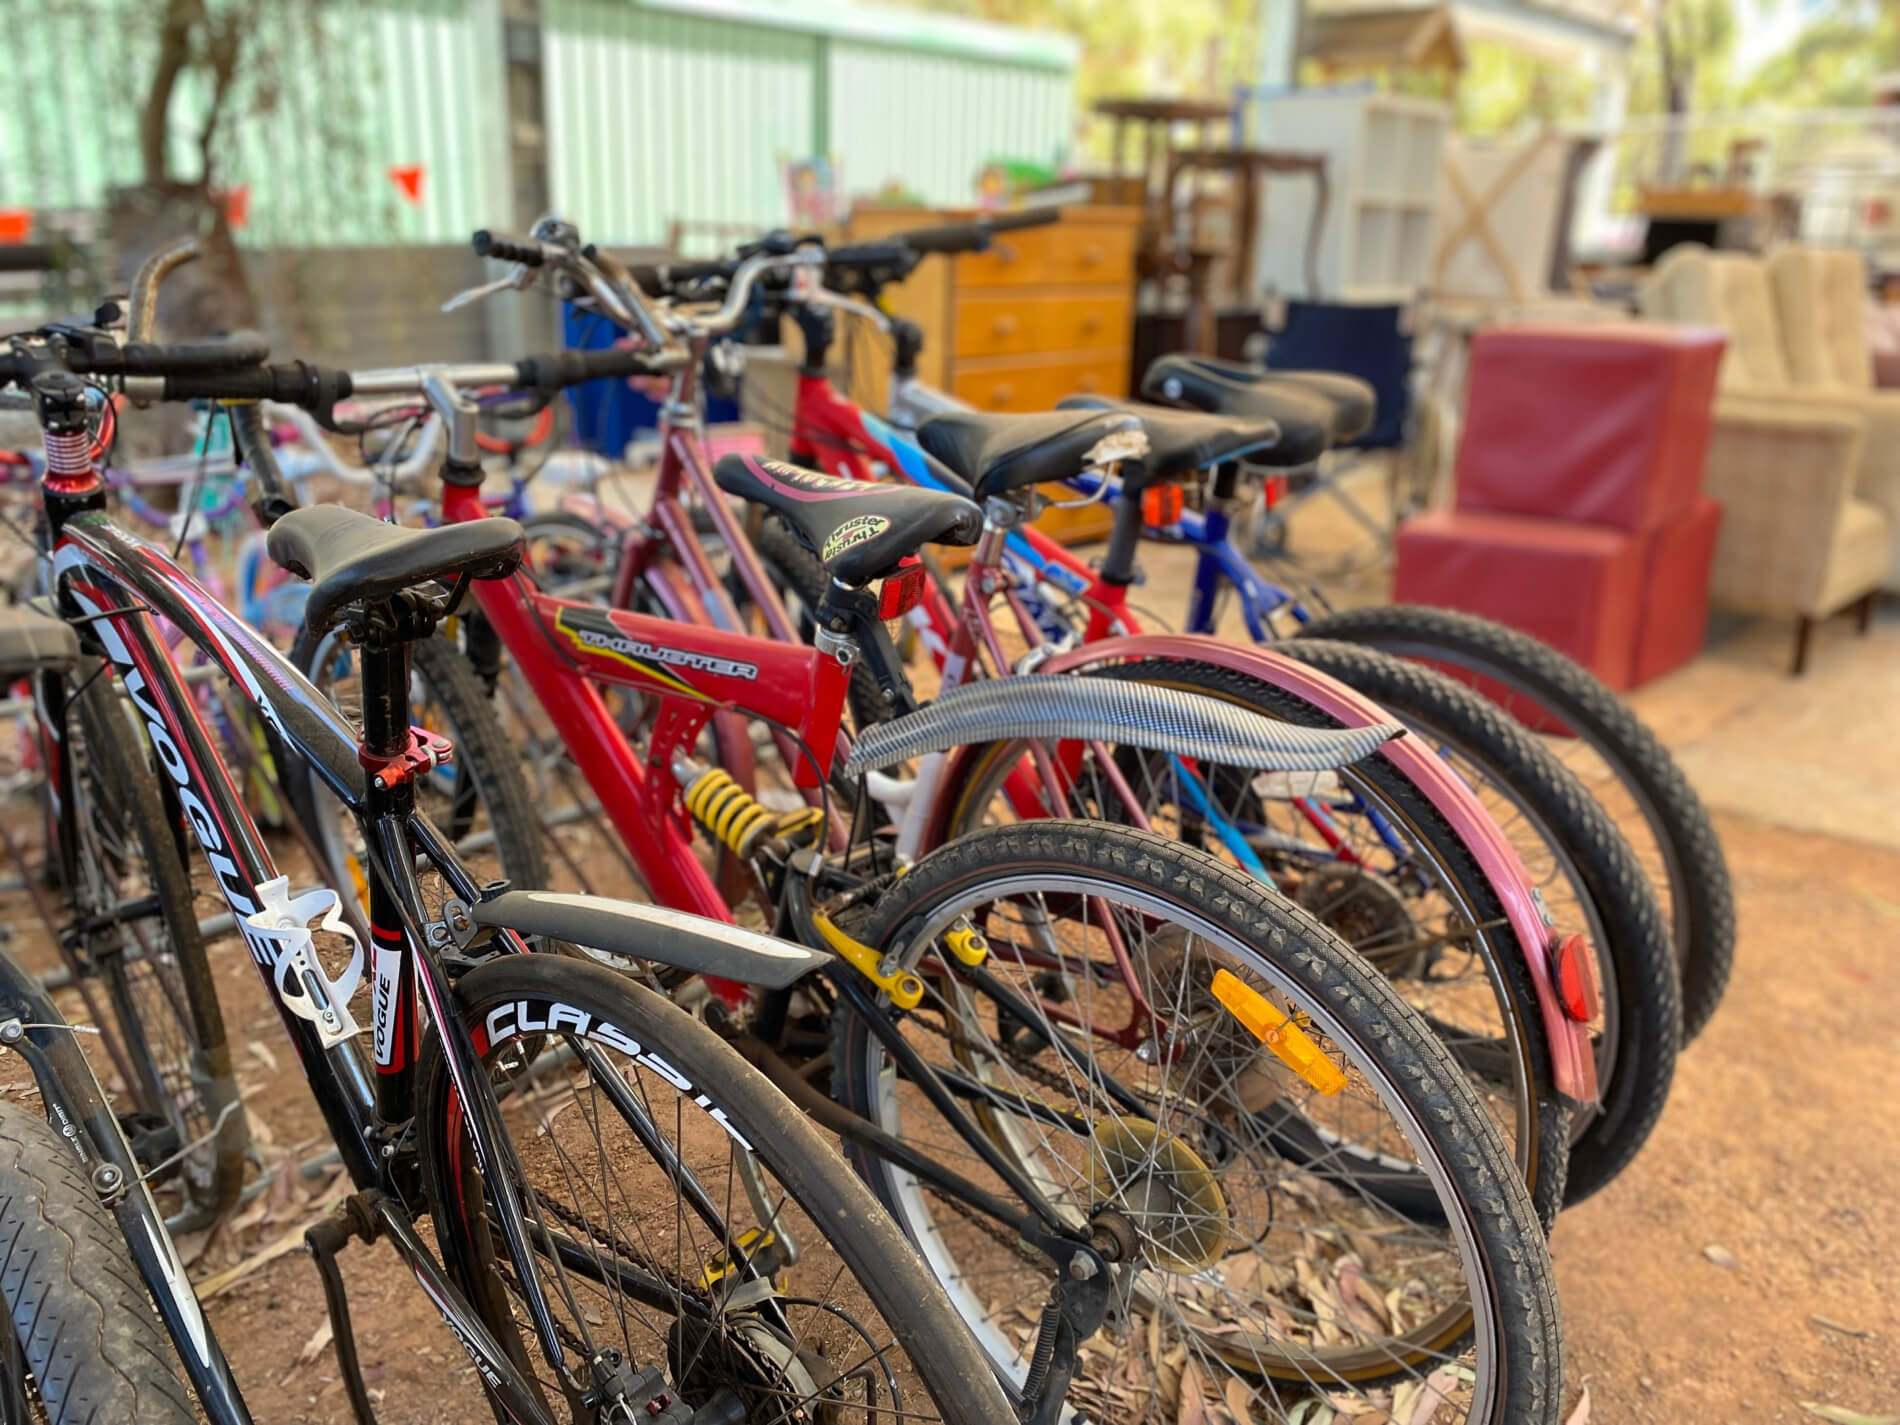 Second Chance reuse shop display of bicycles on offer